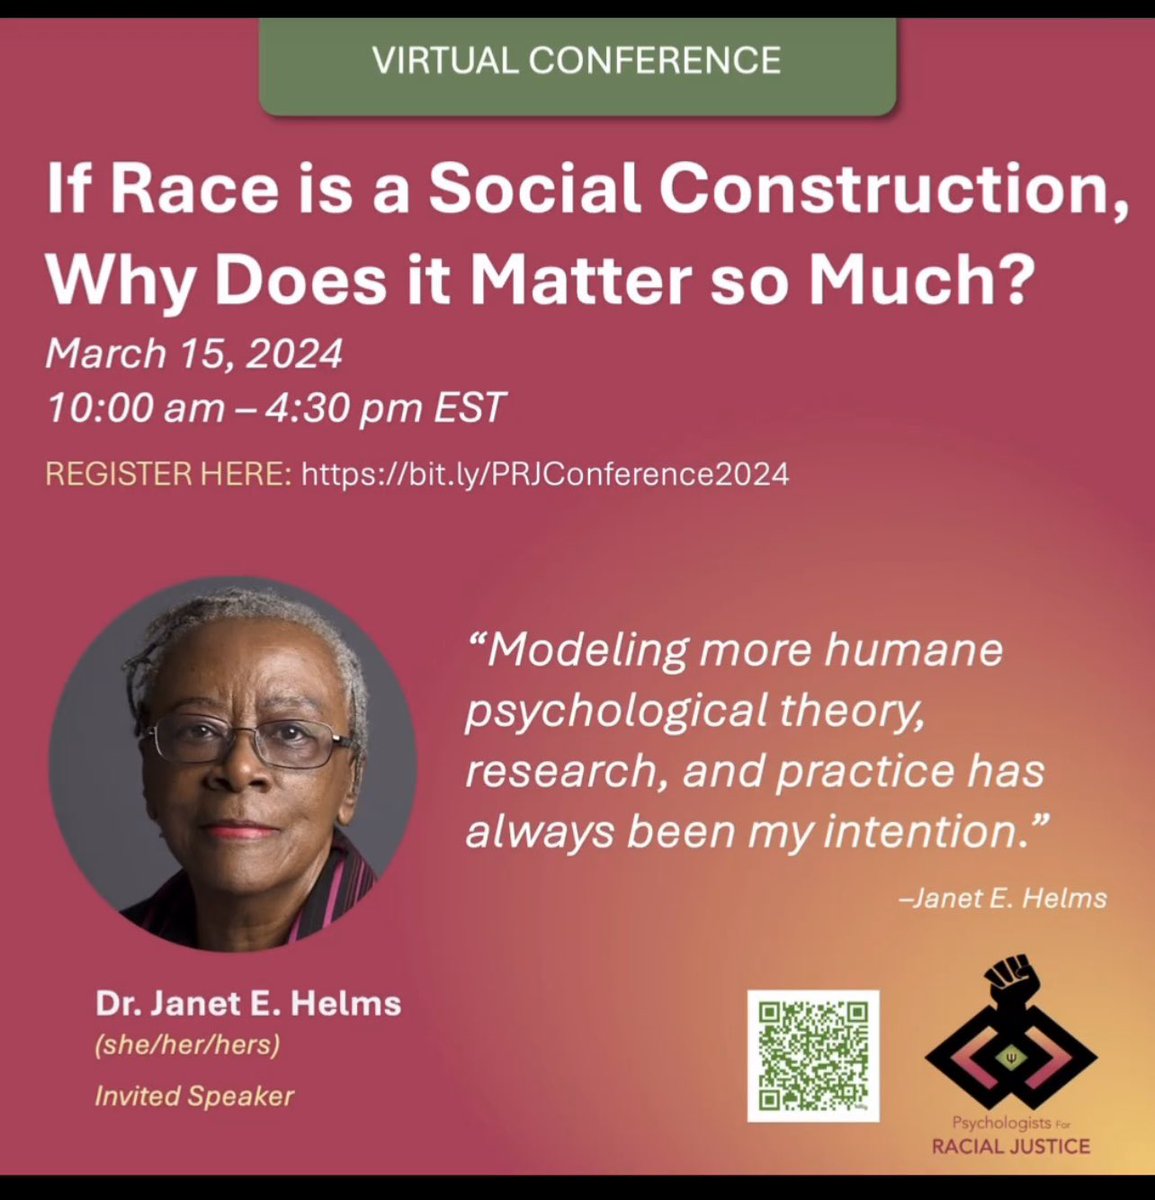 If Race Is a Social Construction, Why Does It Matter So Much? Virtual conference this Friday March 15 10:00am to 4:30pm. Register via QR code on flyer @drcegreen @DrWillMingLiu @UMDCollegeofEd @UMDResearch